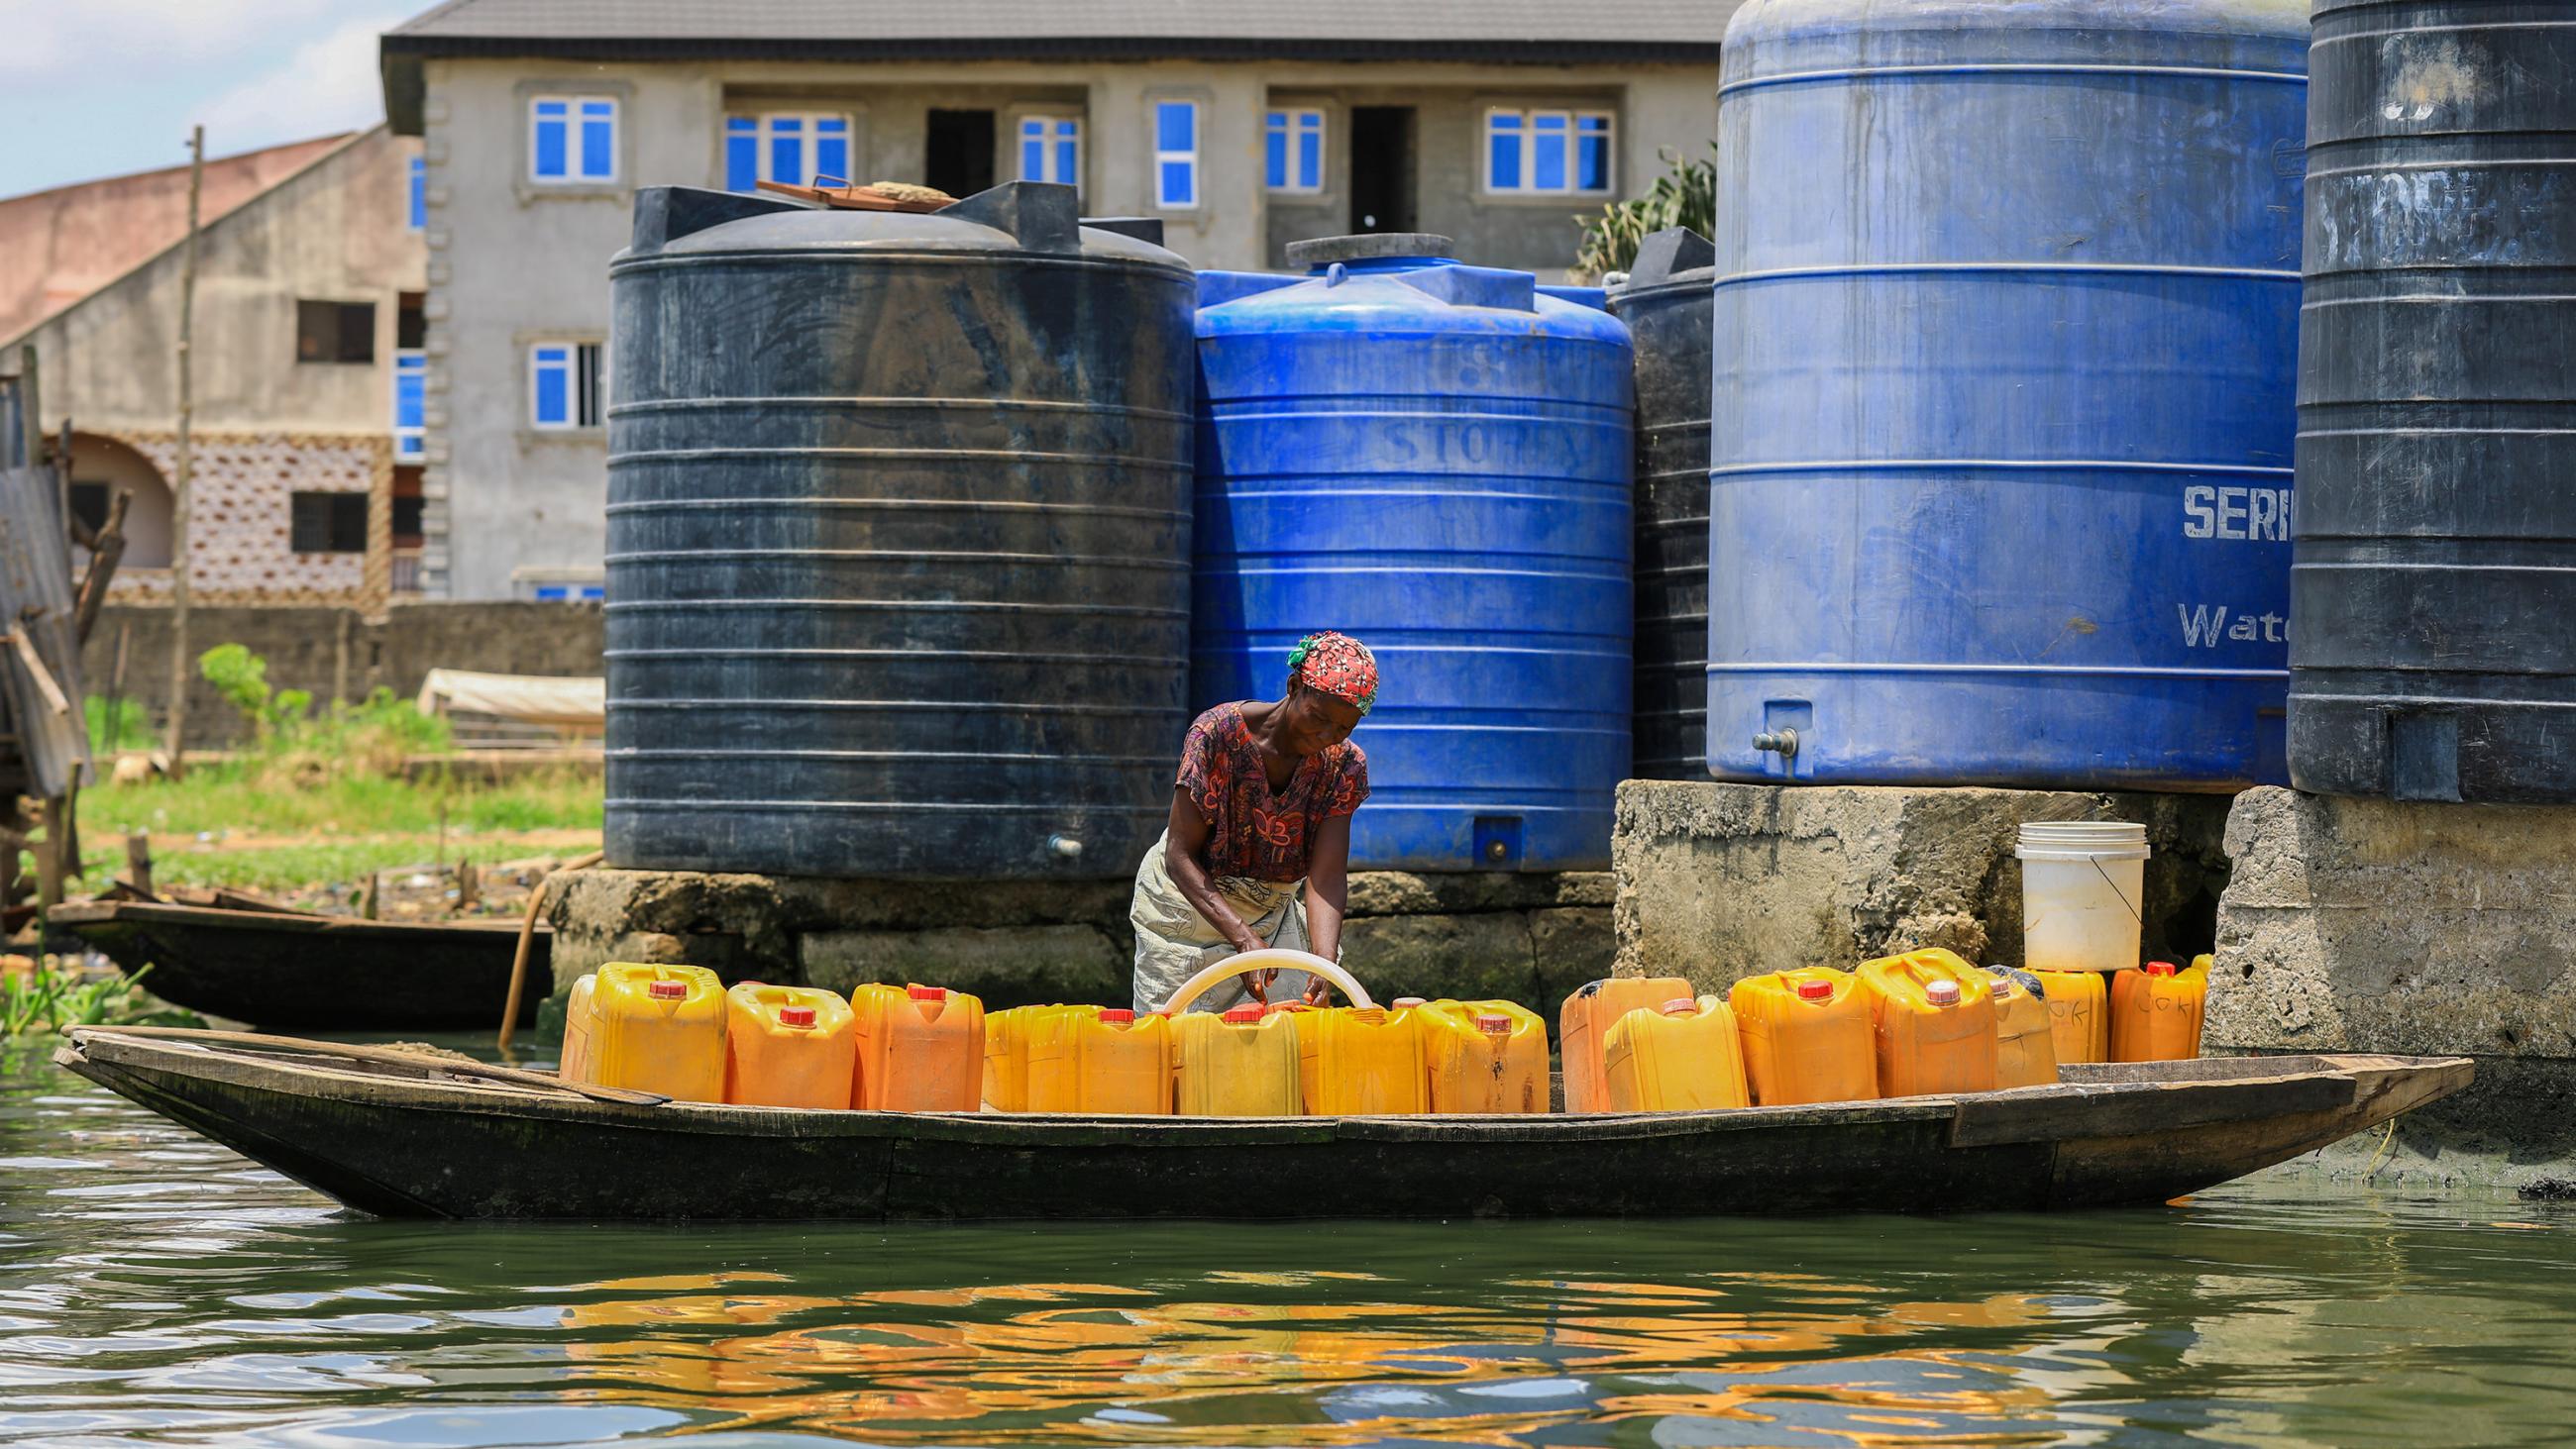 Picture shows a woman with a long dugout canoe pulled up to a filling station with a number of towering water tanks. She is filling a row of yellow jerrycans lined up inside the canoe. 